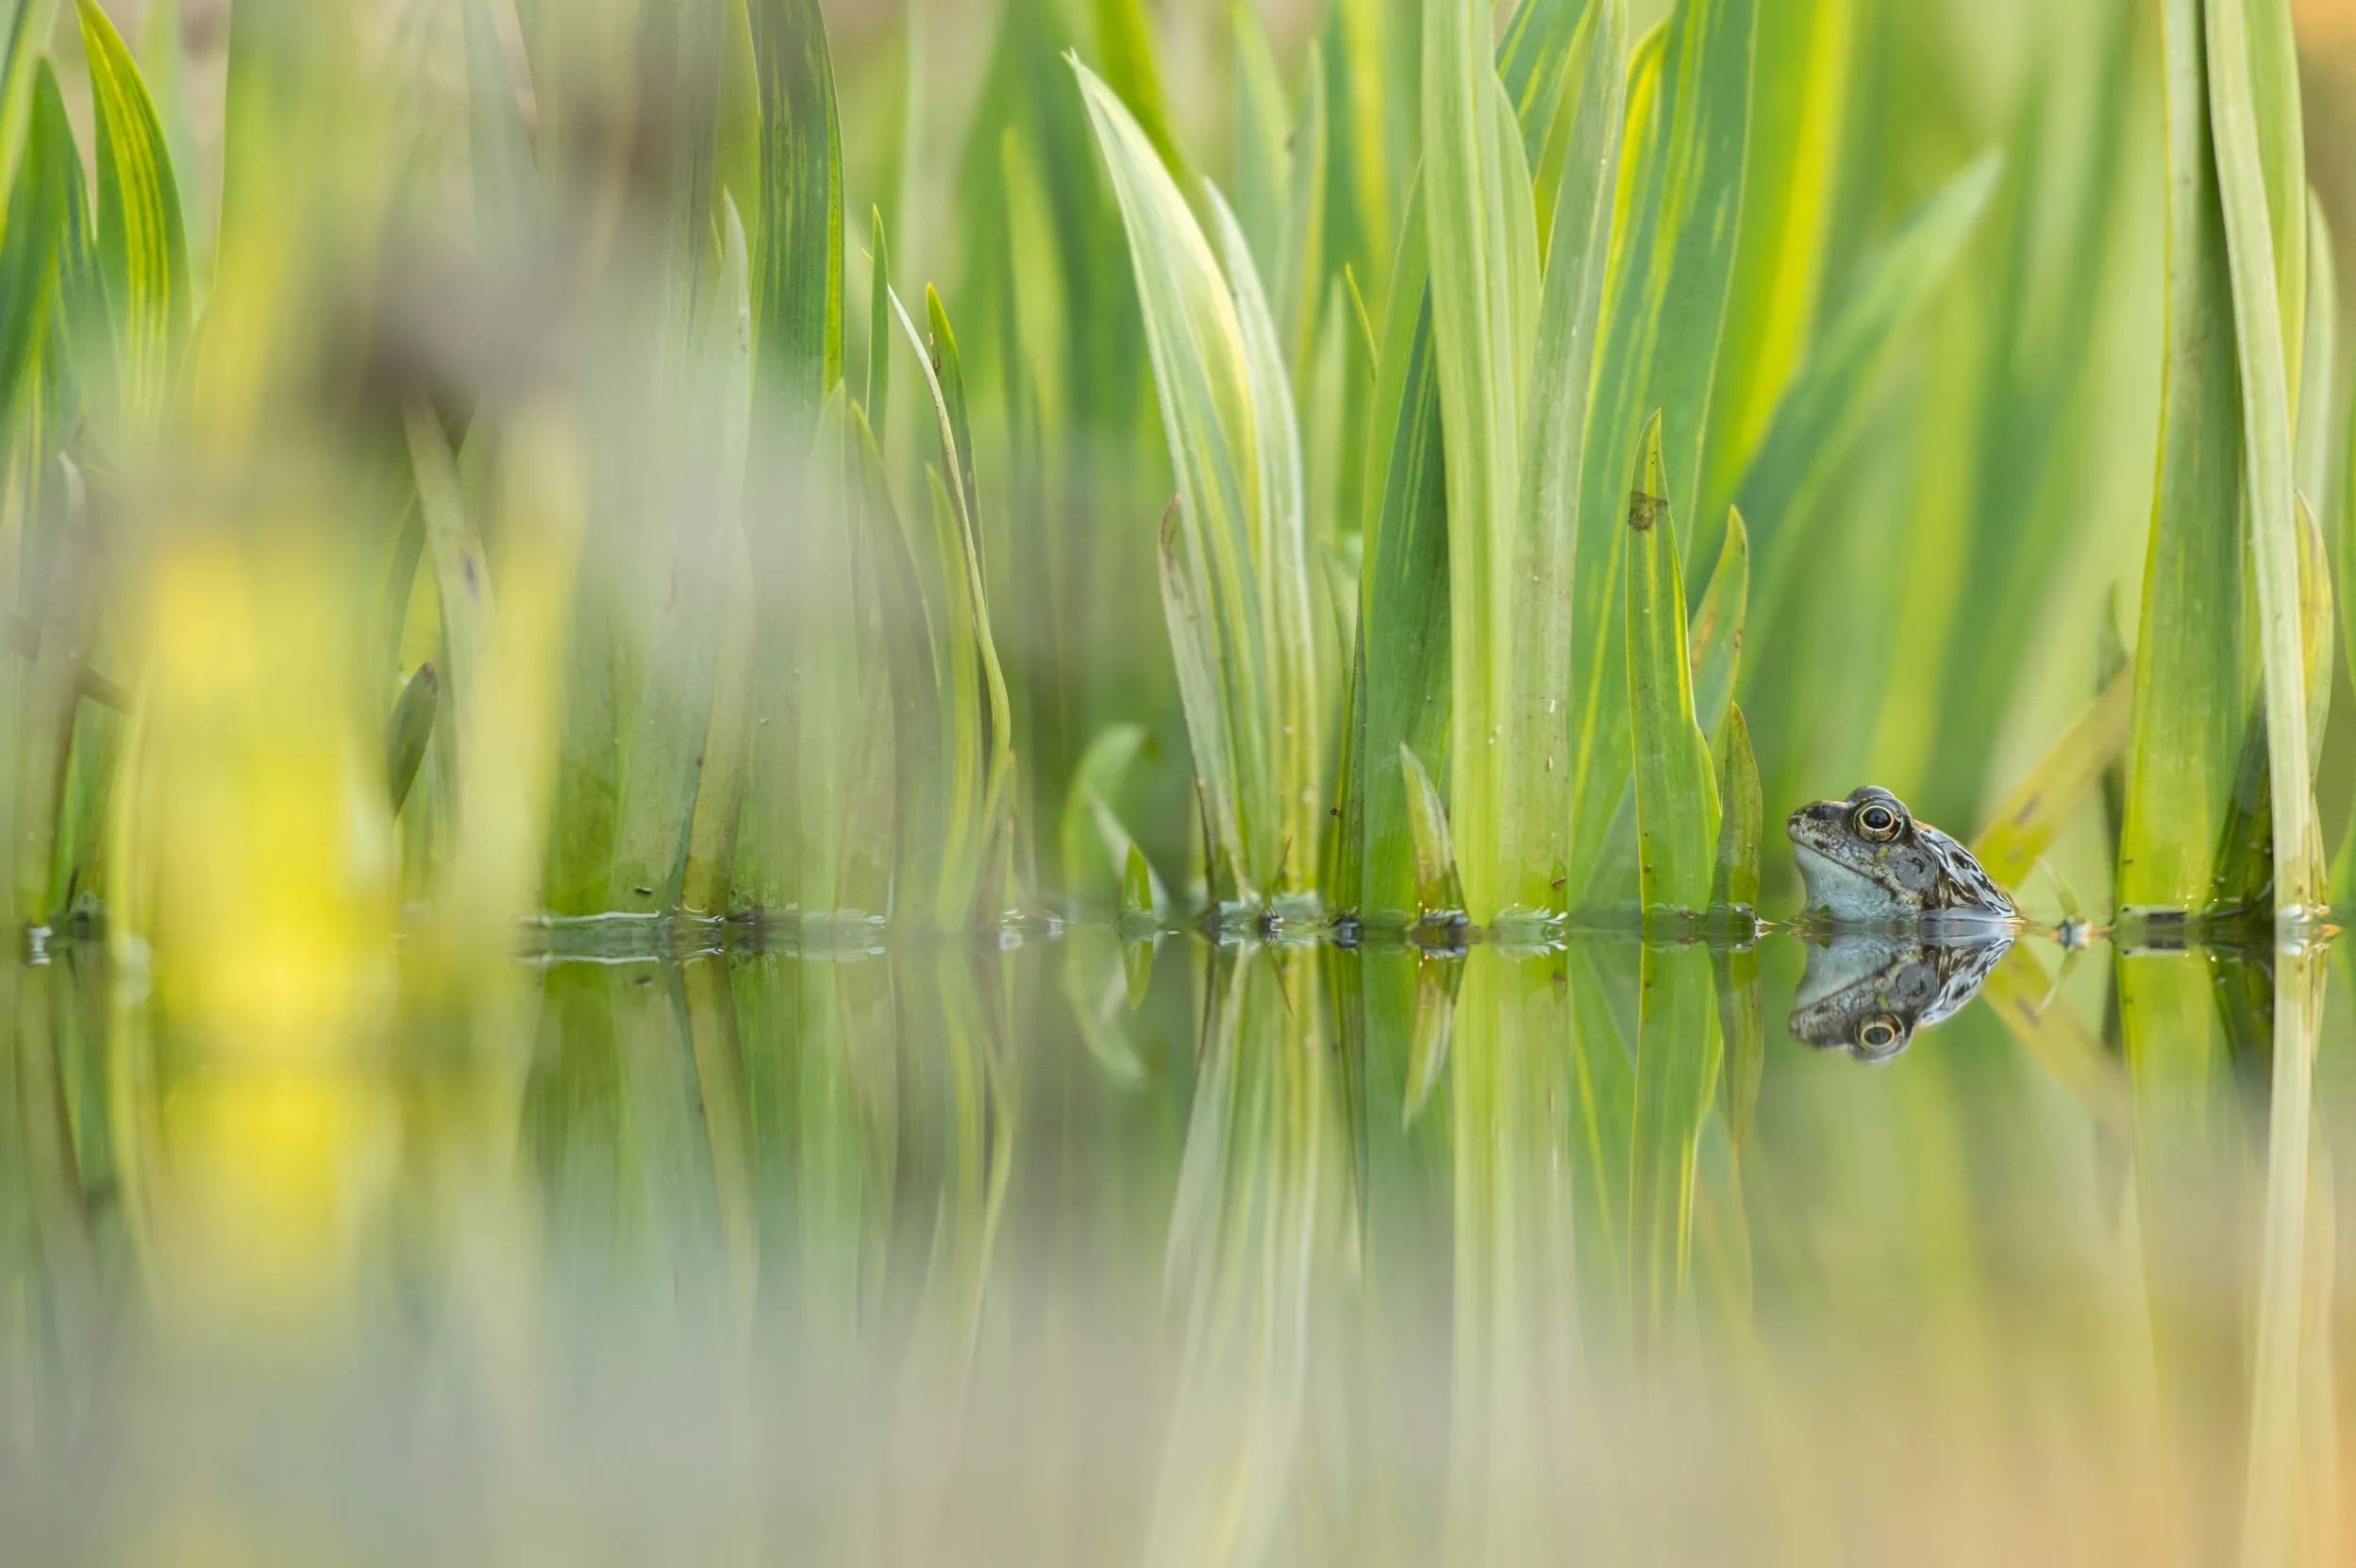 A Common Frog sitting in a pool of water amongst green foliage.